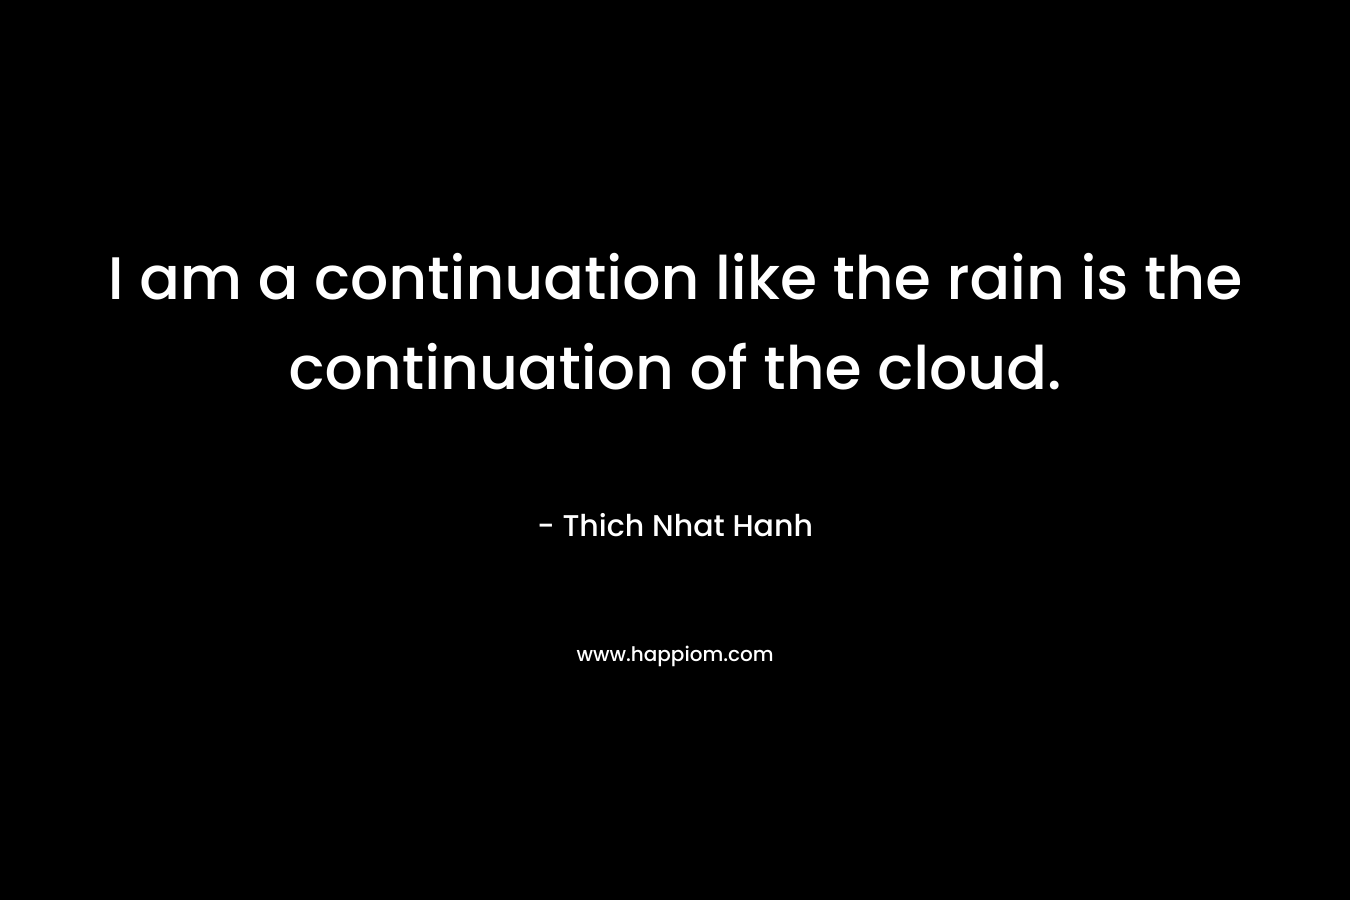 I am a continuation like the rain is the continuation of the cloud. – Thich Nhat Hanh